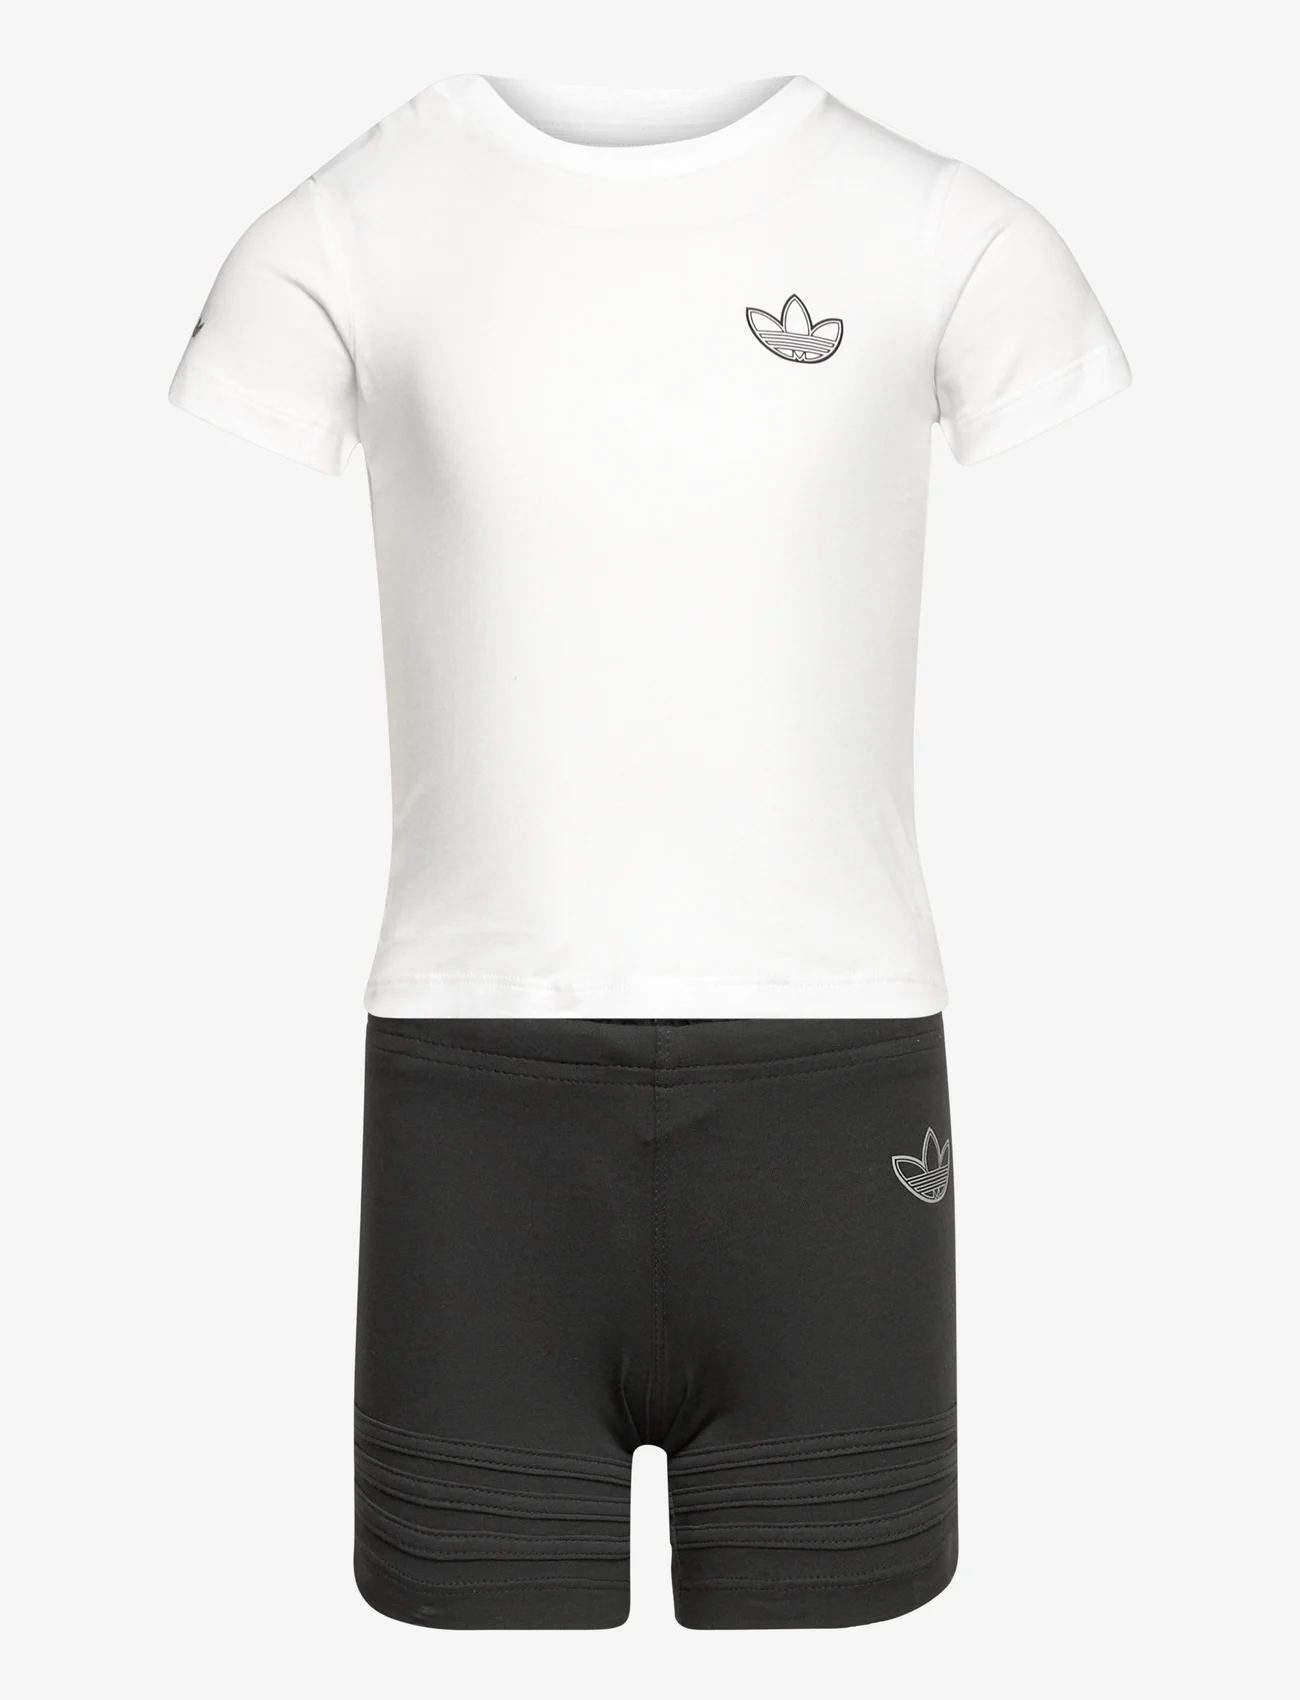 adidas Originals - SPRT Collection Shorts and Tee Set - lowest prices - white - 0